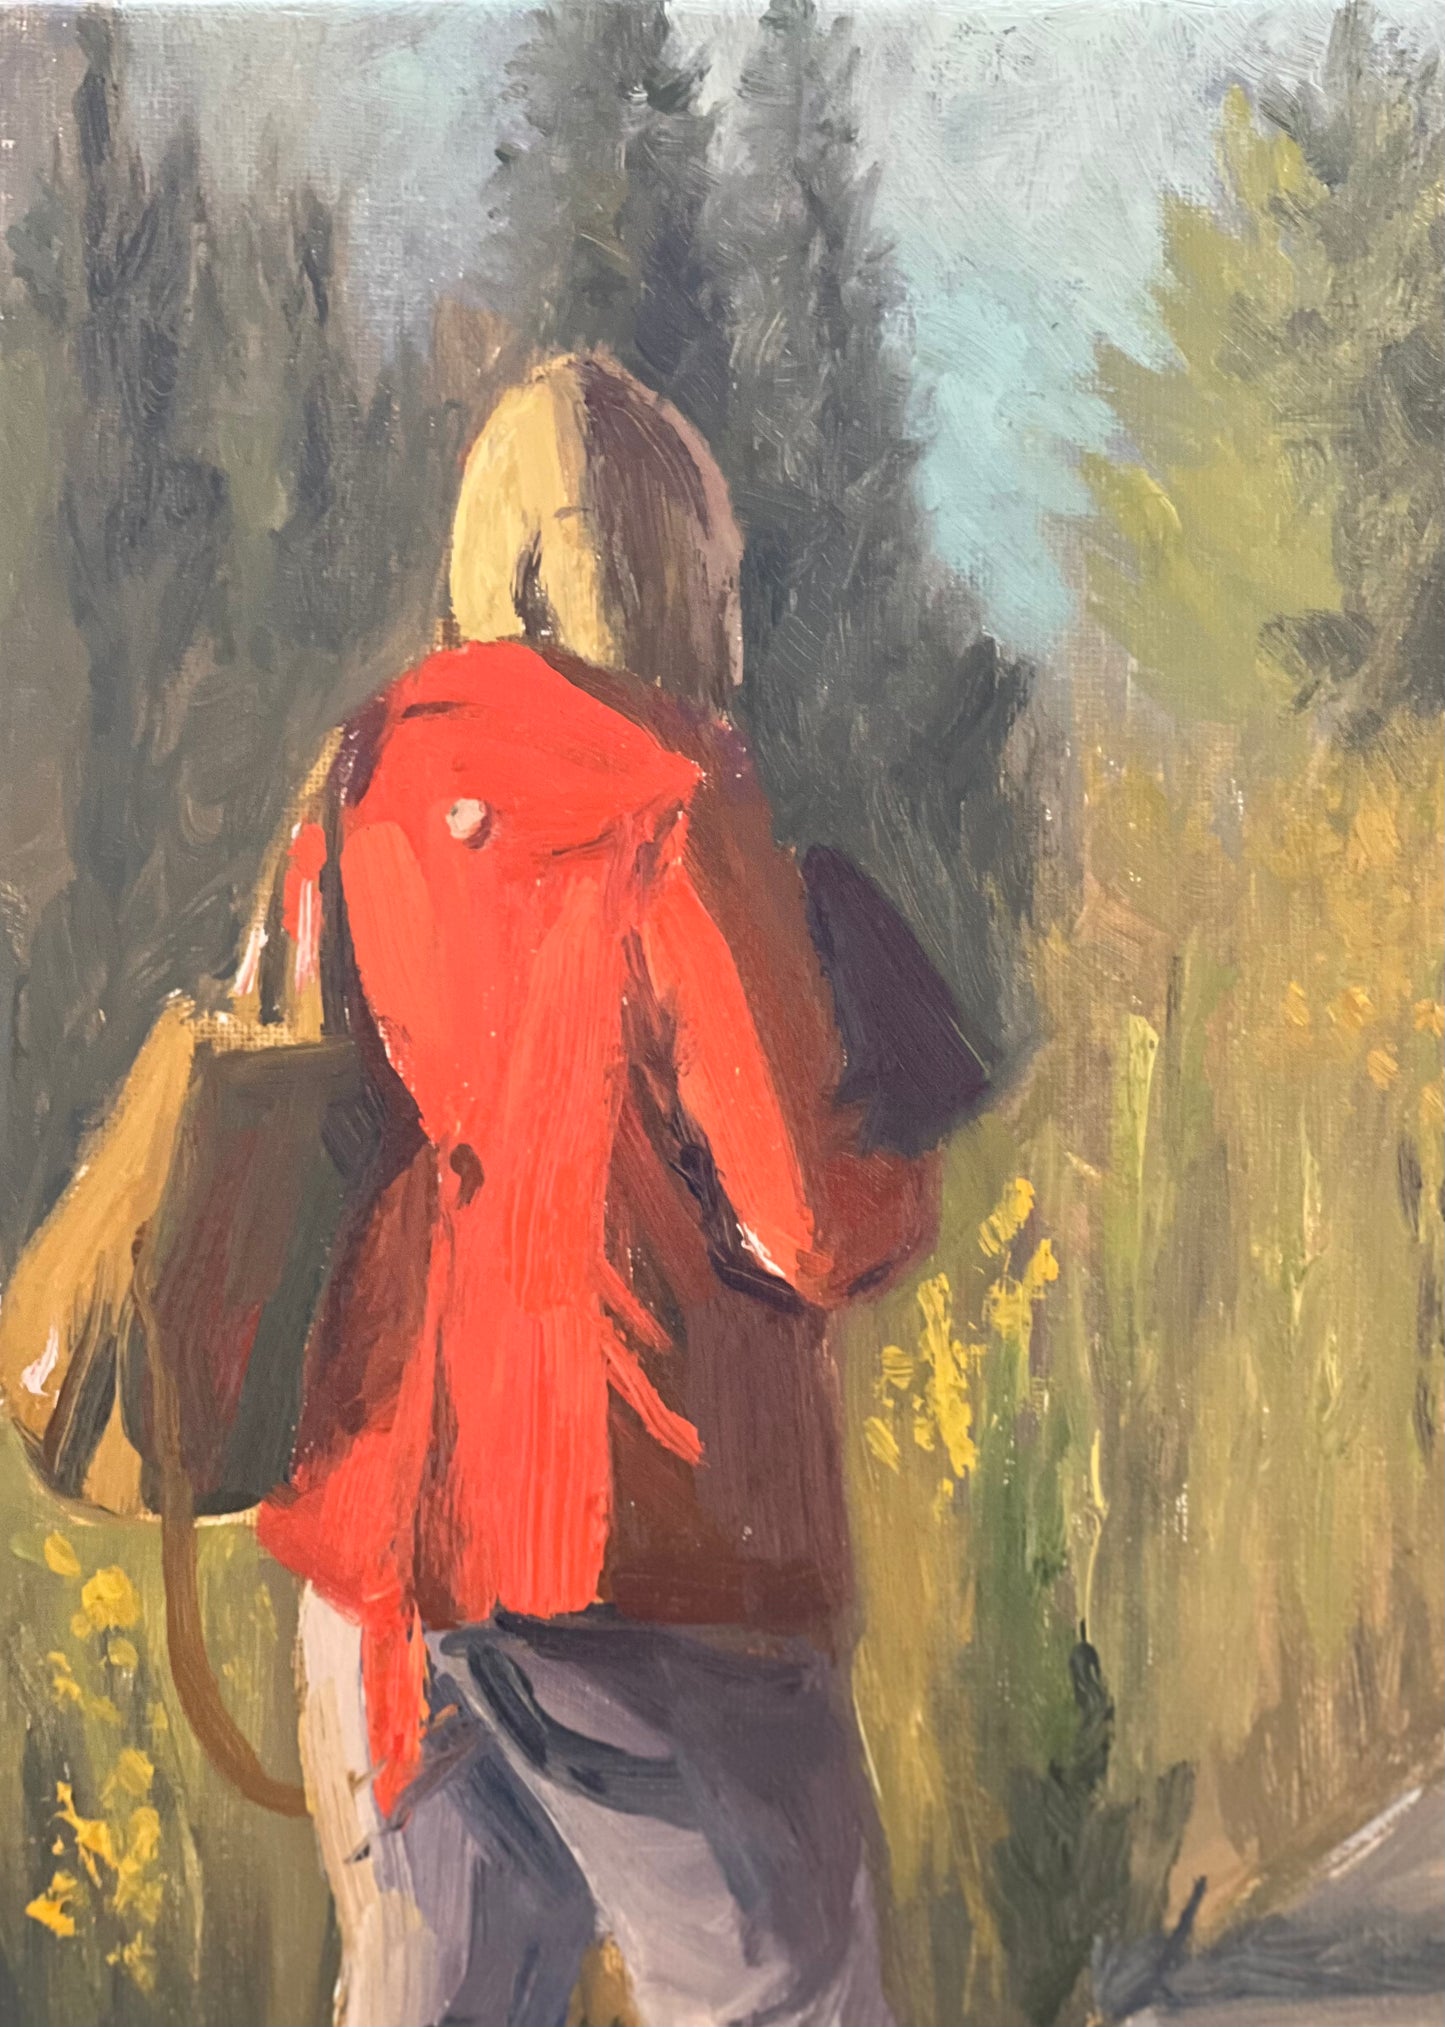 Figurative Oil painting - Morning commute!